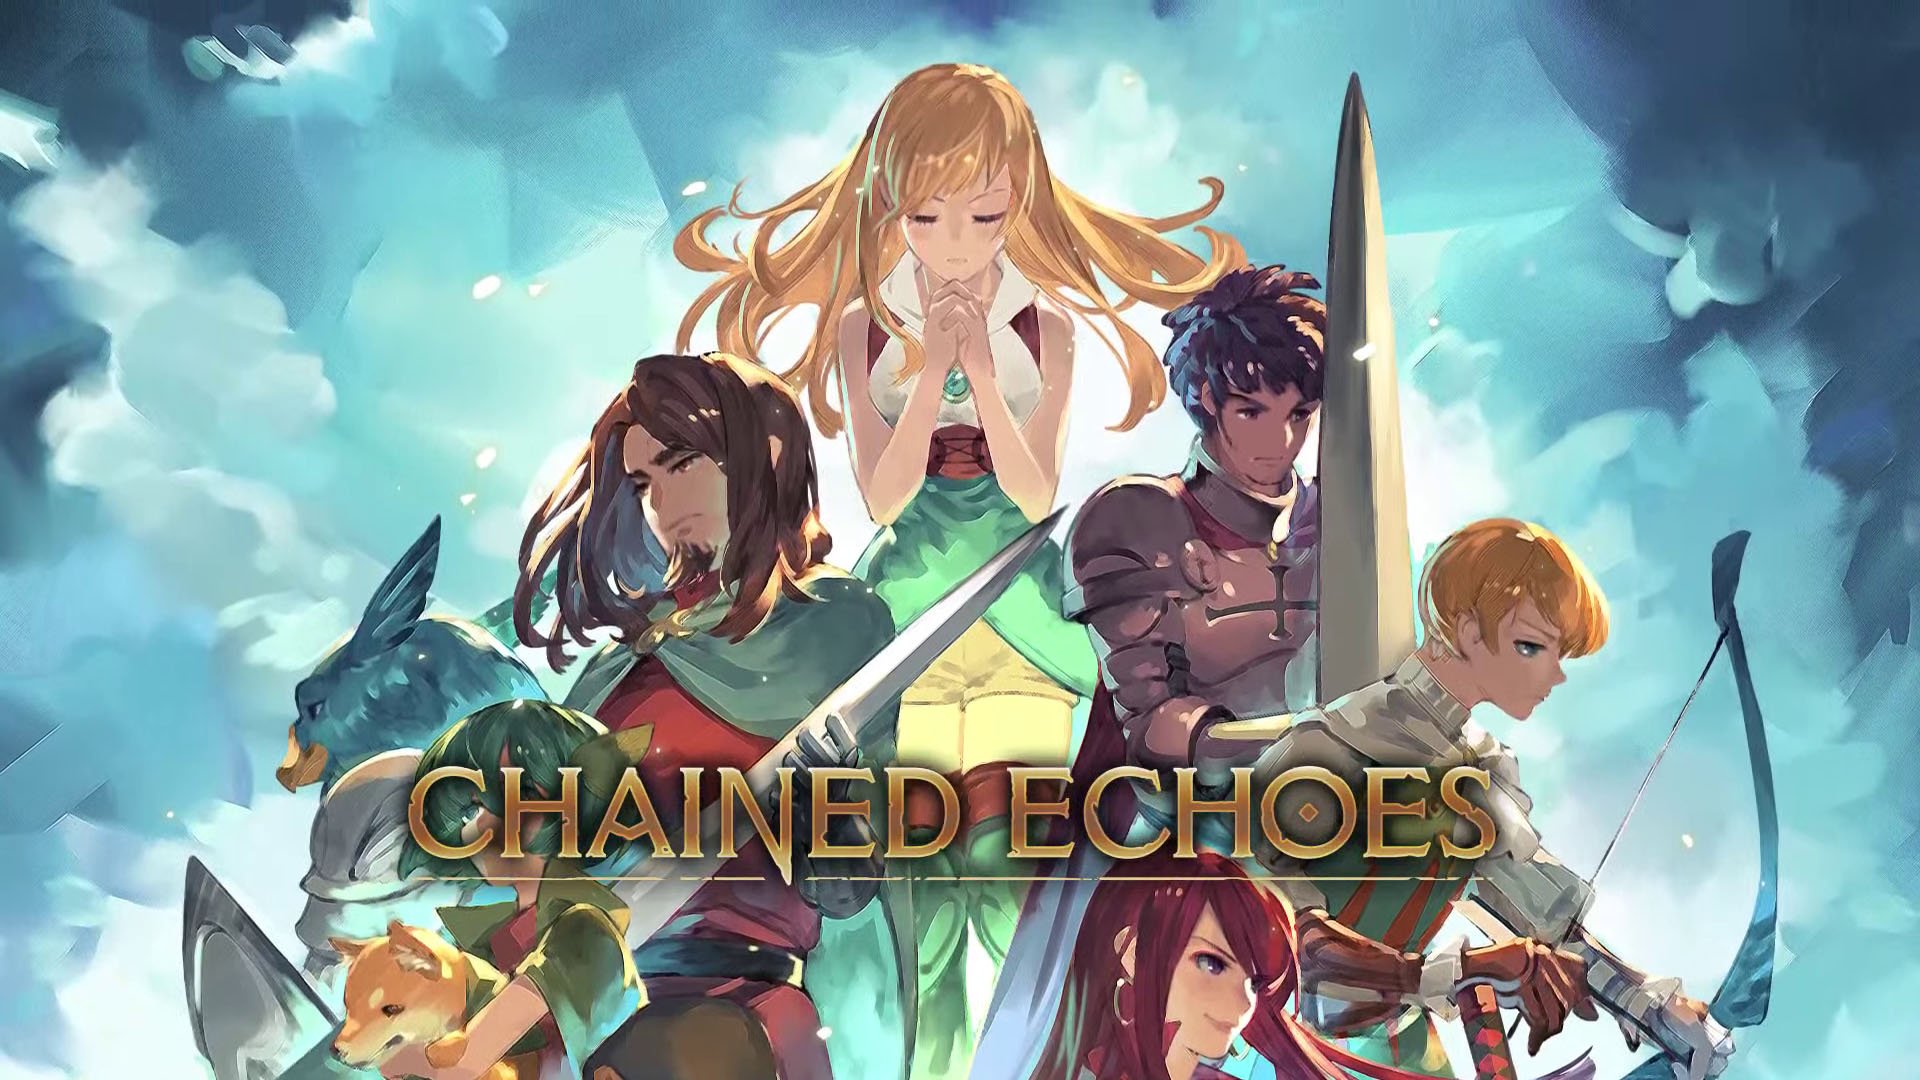 #
      Chained Echoes launches in Q4 2022 for PS4, Xbox One, Switch, and PC